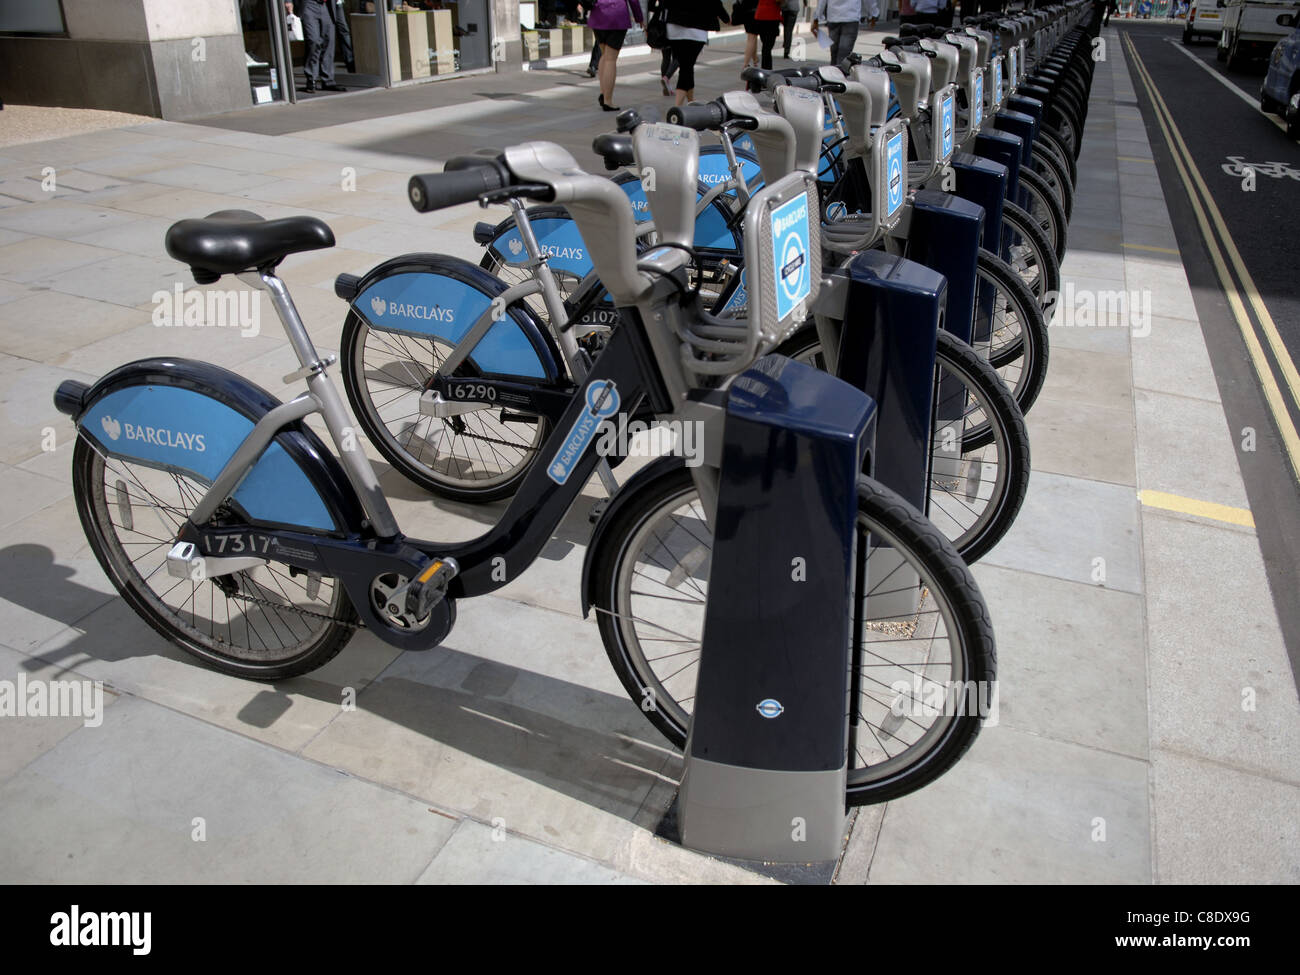 Bicycles for hire in the City Of London. To try to help with traffic congestion, these can be hired very cheaply by the public. Stock Photo